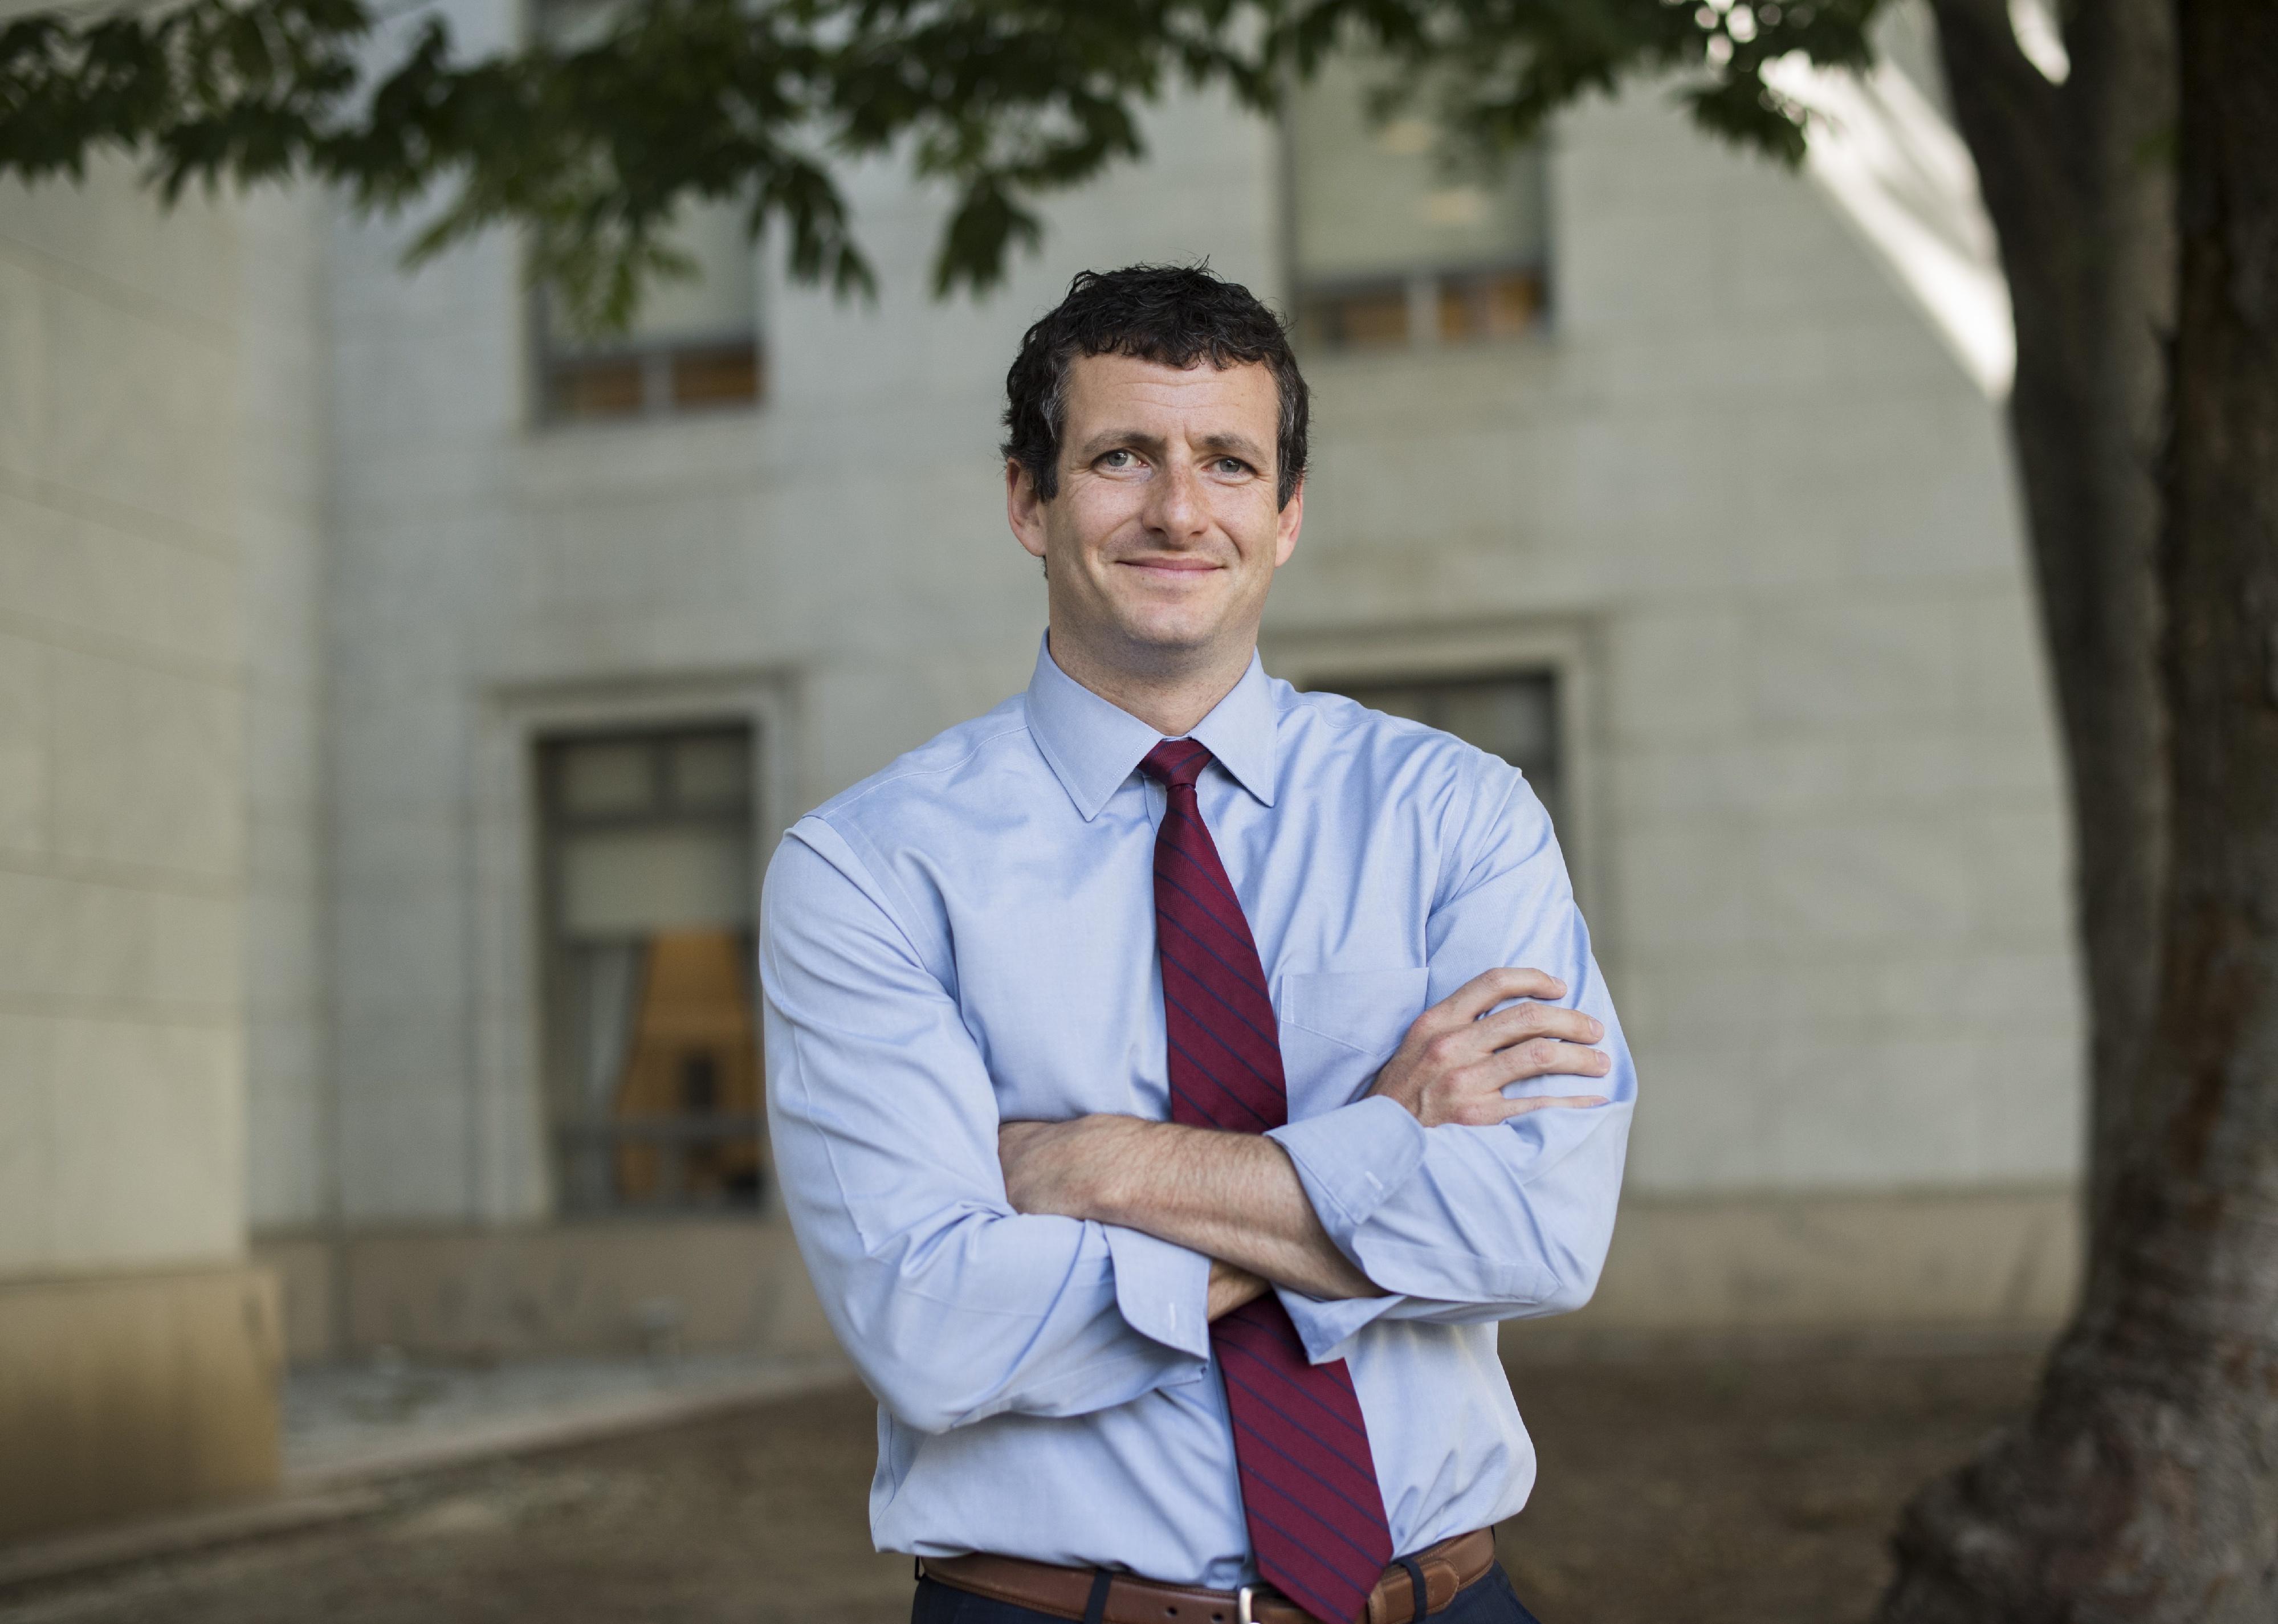 Trey Hollingsworth, in a blue button-down shirt and tie, smiling with his arms crossed in a courtyard.